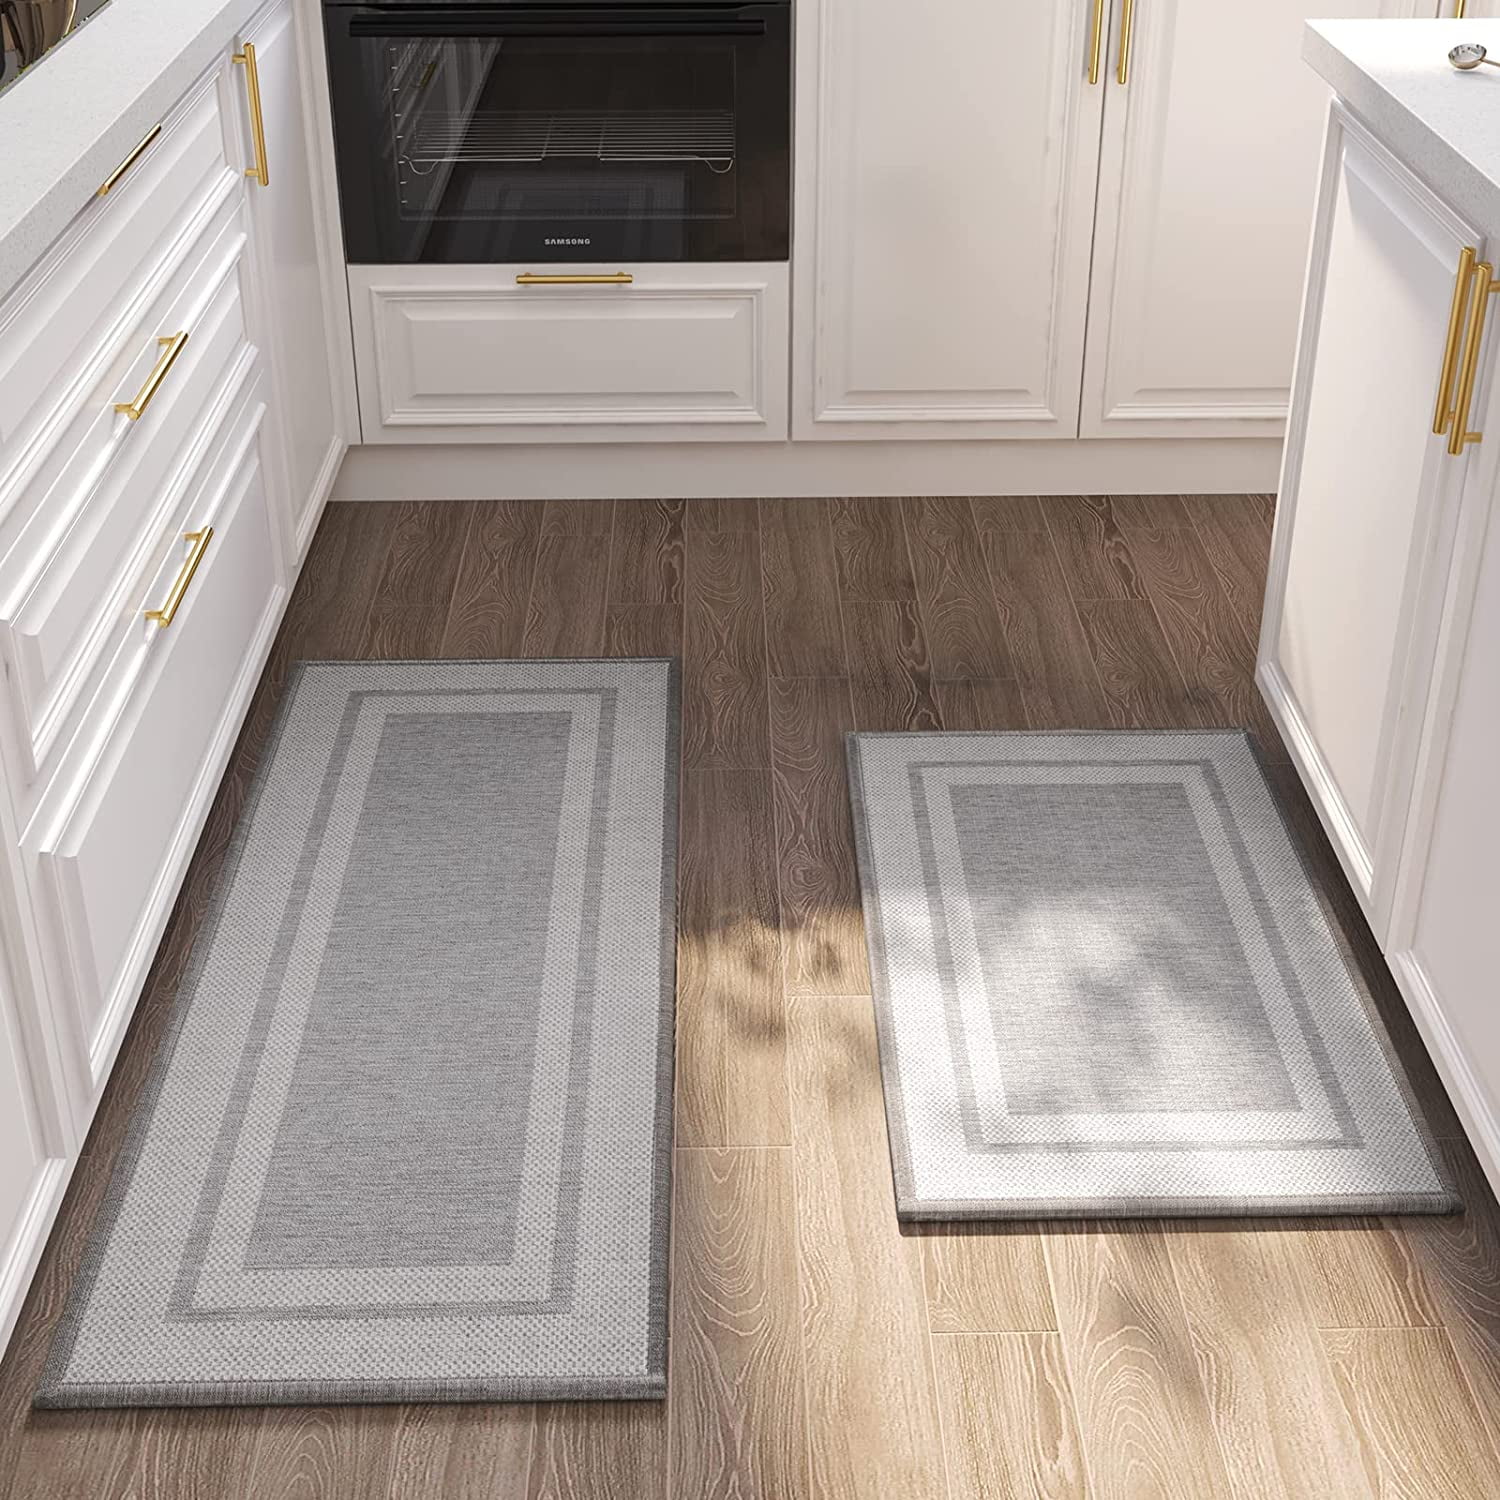 SIXHOME Kitchen Mat Set Non Skid Kitchen Rugs and Mats 2PCS Rubber Kitchen  Floor Runner Rug 17x30+17x47 Washable Kitchen Rugs Set Front of Sink  Hallway Laundry Room Dark Chocolate Black 